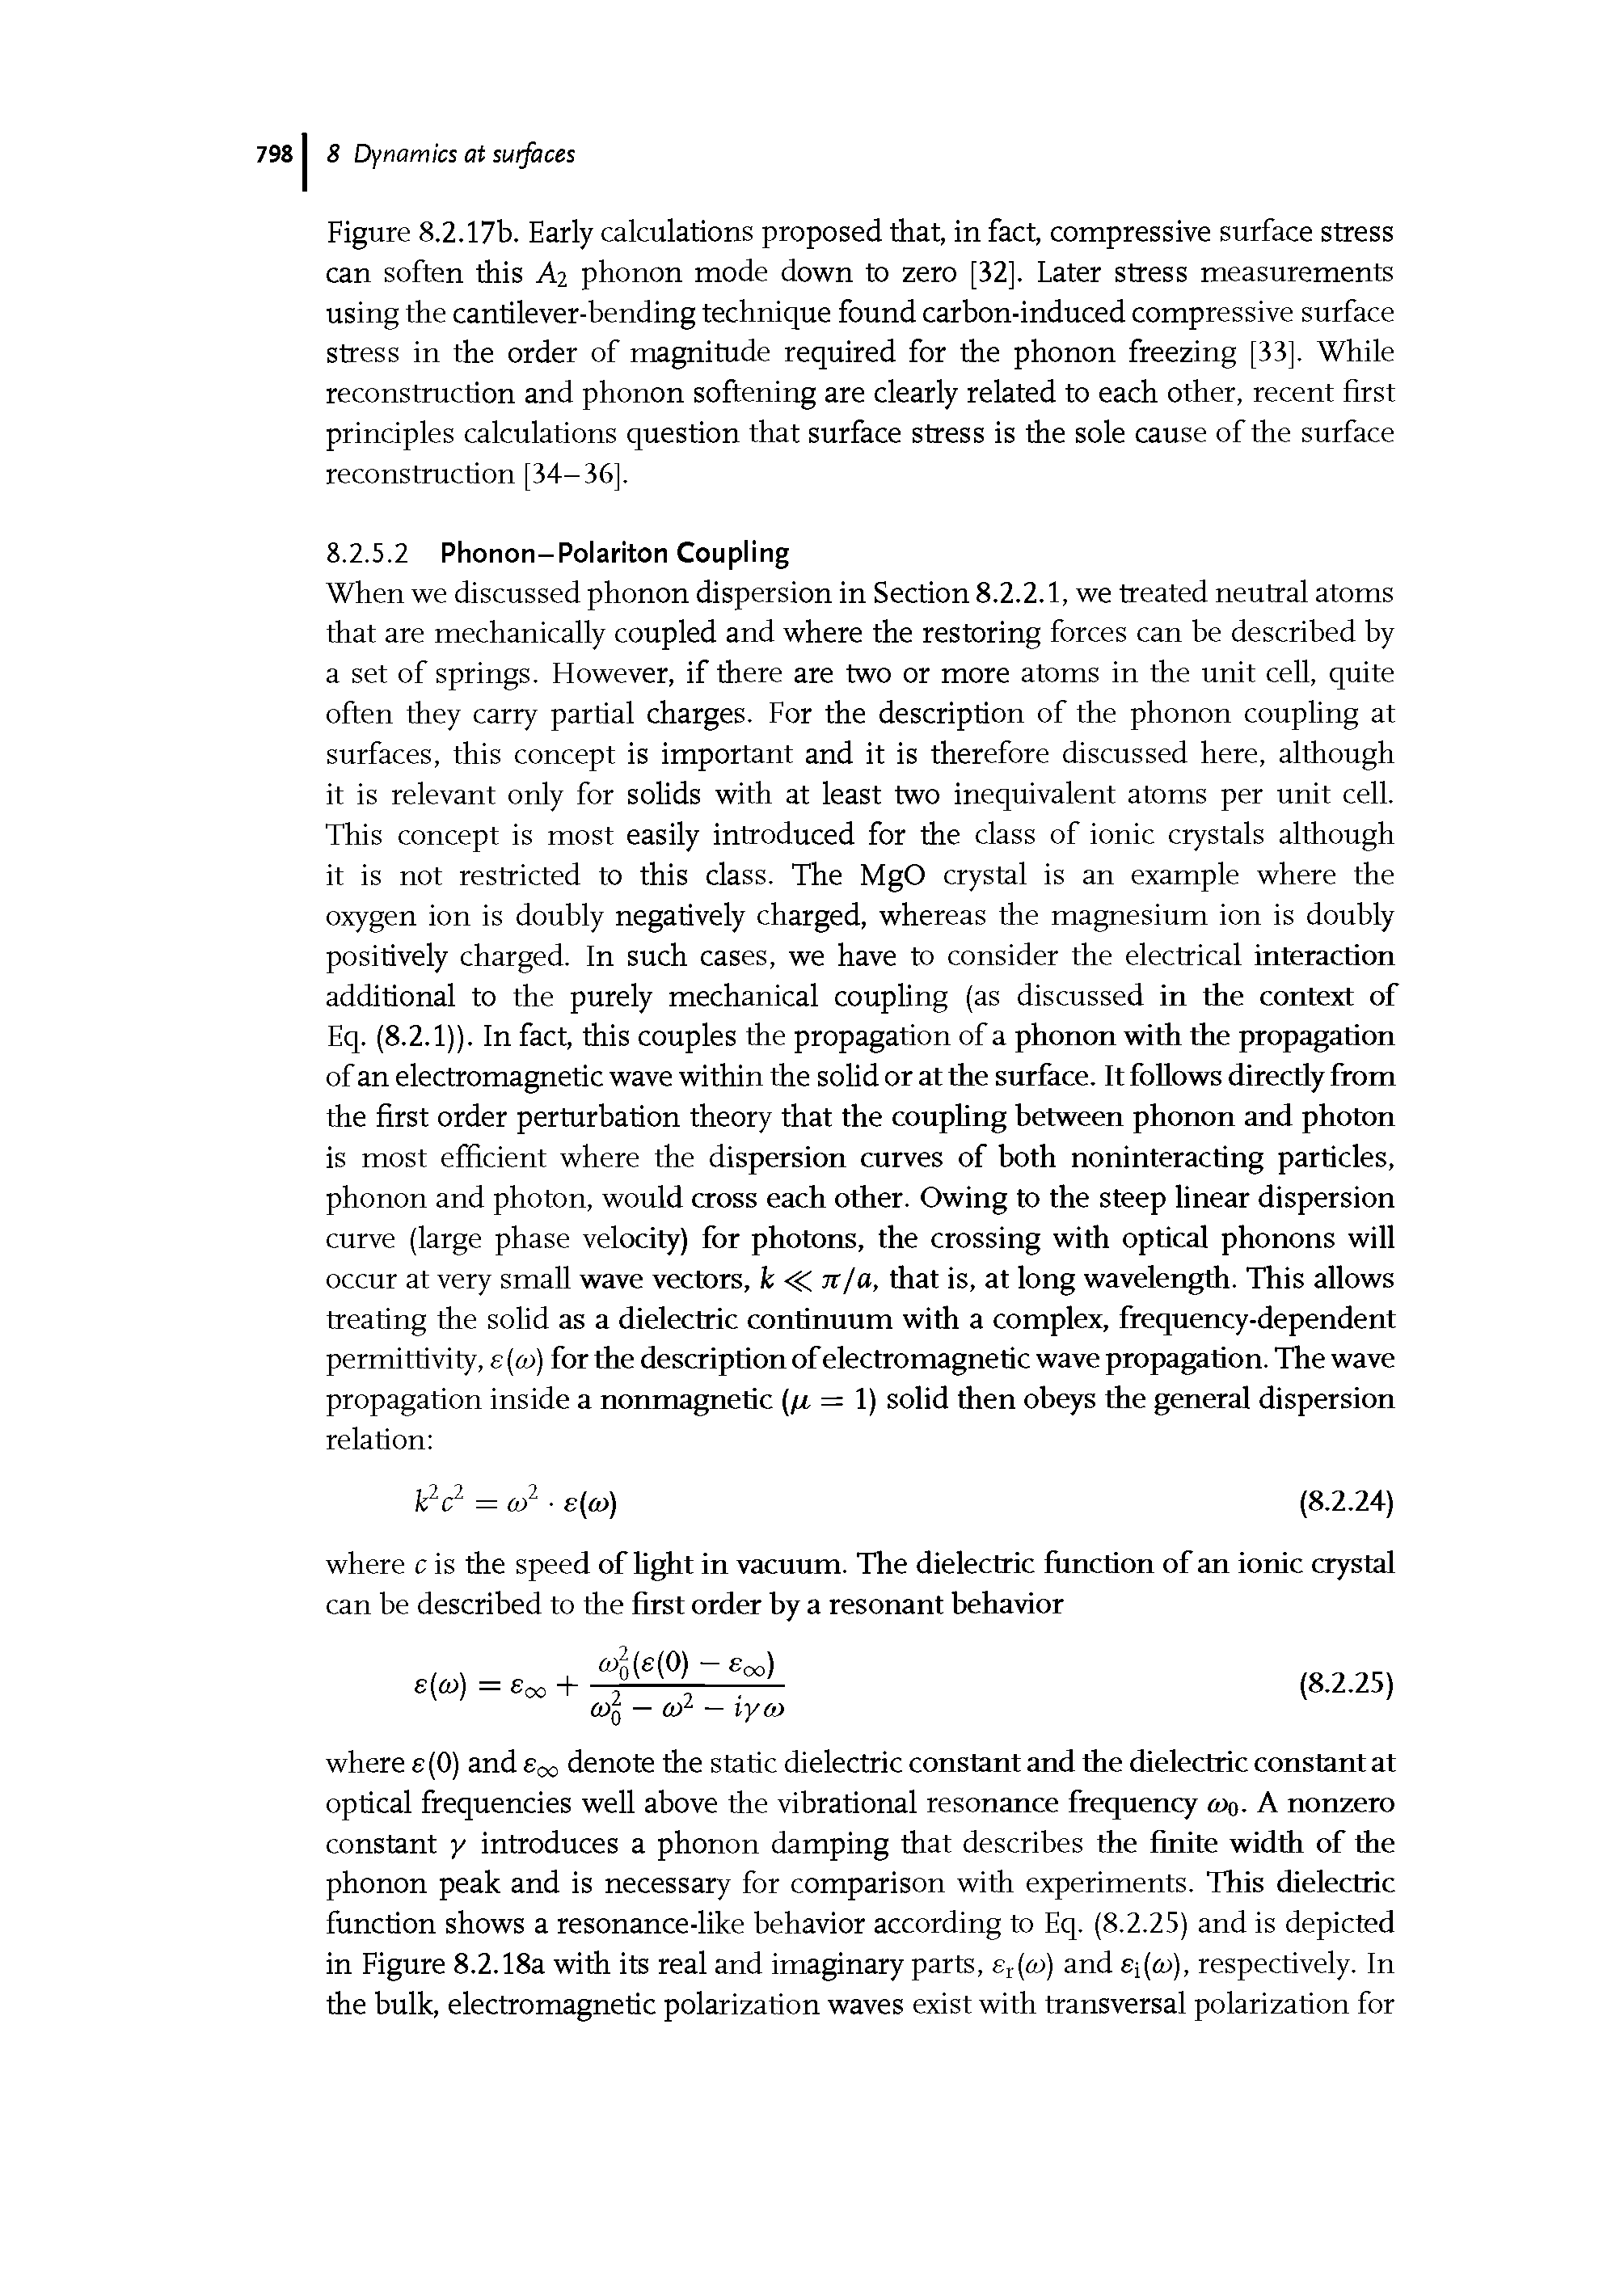 Figure 8.2.17b. Early calculations proposed that, in fact, compressive surface stress can soften this Ai phonon mode down to zero [32]. Later stress measurements using the cantilever-bending technique found carbon-induced compressive surface stress in the order of magnitude required for the phonon freezing [33]. While reconstruction and phonon softening are clearly related to each other, recent first principles calculations question that surface stress is the sole cause of the surface reconstruction [34-36].